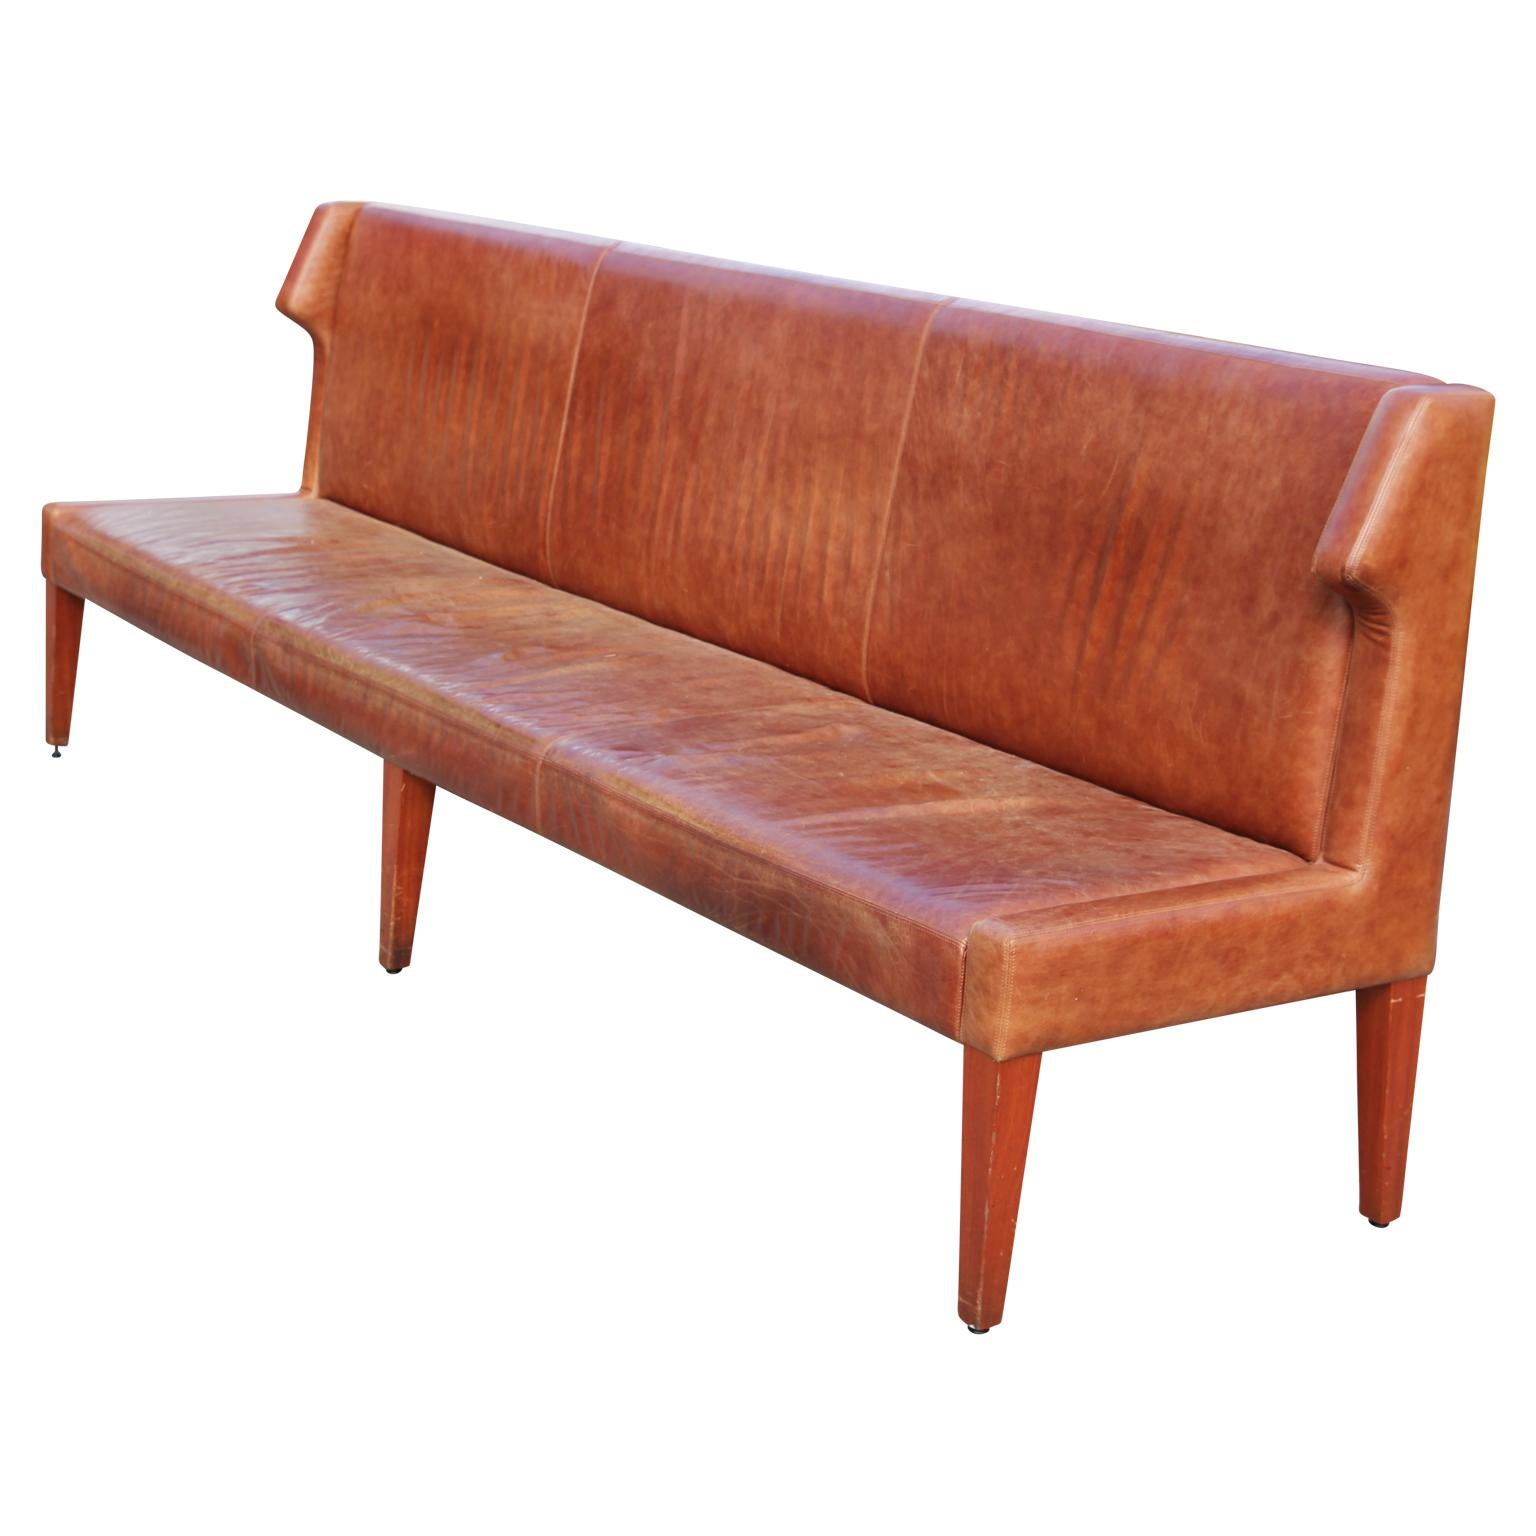 Long leather sofa designed by Jordan Mozer for the notable Américas Restaurant, Houston, TX (2012). Each sofa is upholstered in beautiful tan distressed leather. No rips or tears but has lots of wear. 

Jordan Mozer is the founder and principal of